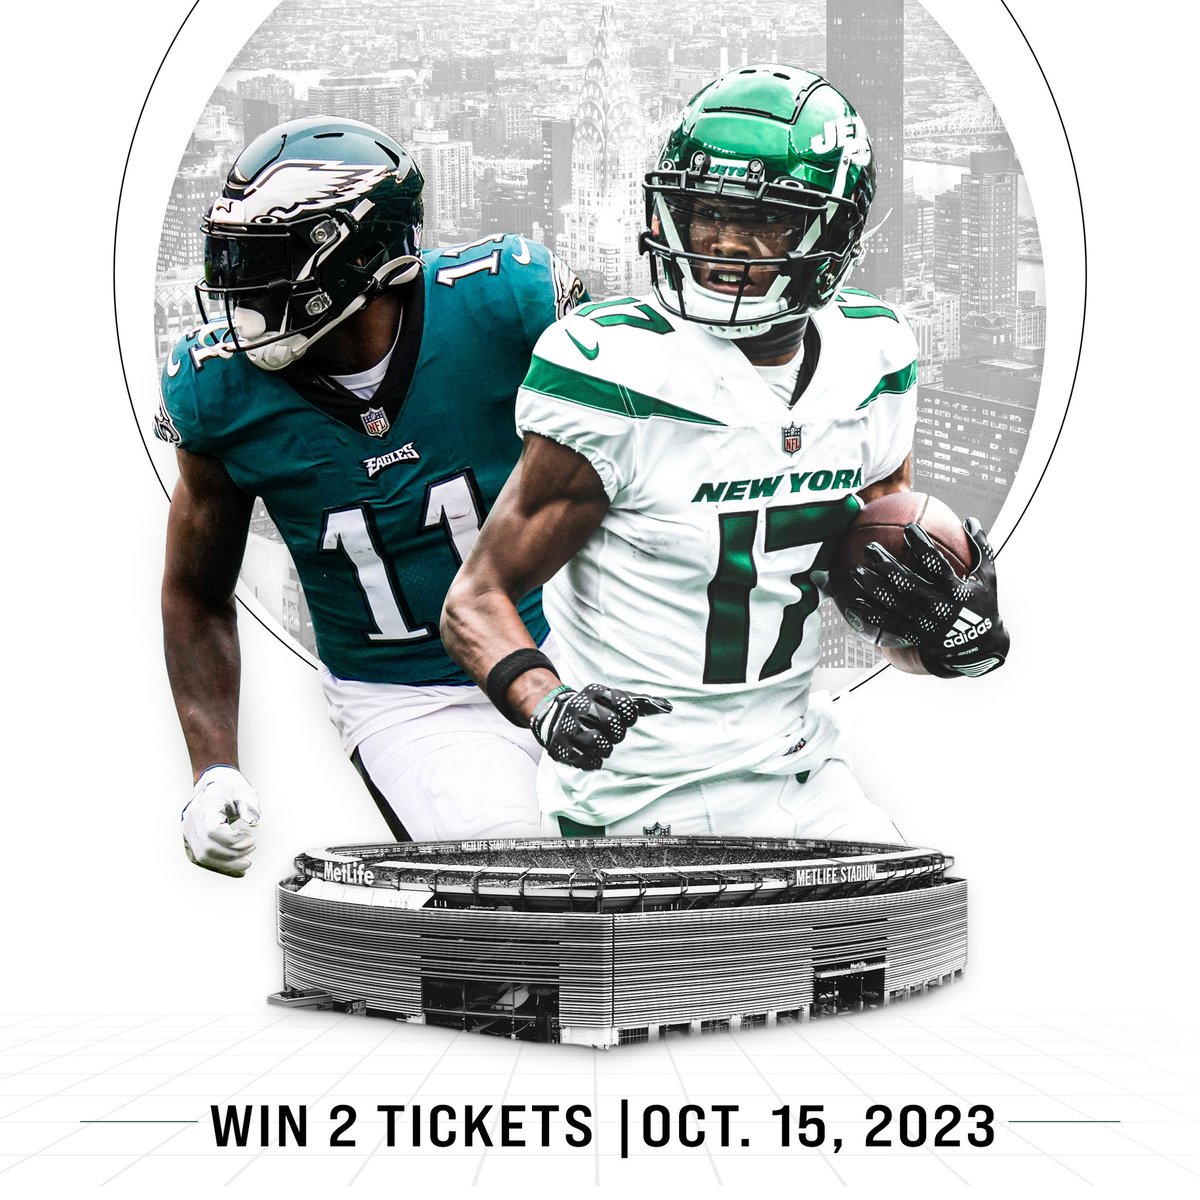 Week 6, Philly is coming to town and you want to be there. I've got two tickets in the Metlife 50 Club for a lucky fan. 

Follow and retweet for a chance to win.

Rules: nyj.social/3poWqVN #PHIvsNYJ #Sweepstakes